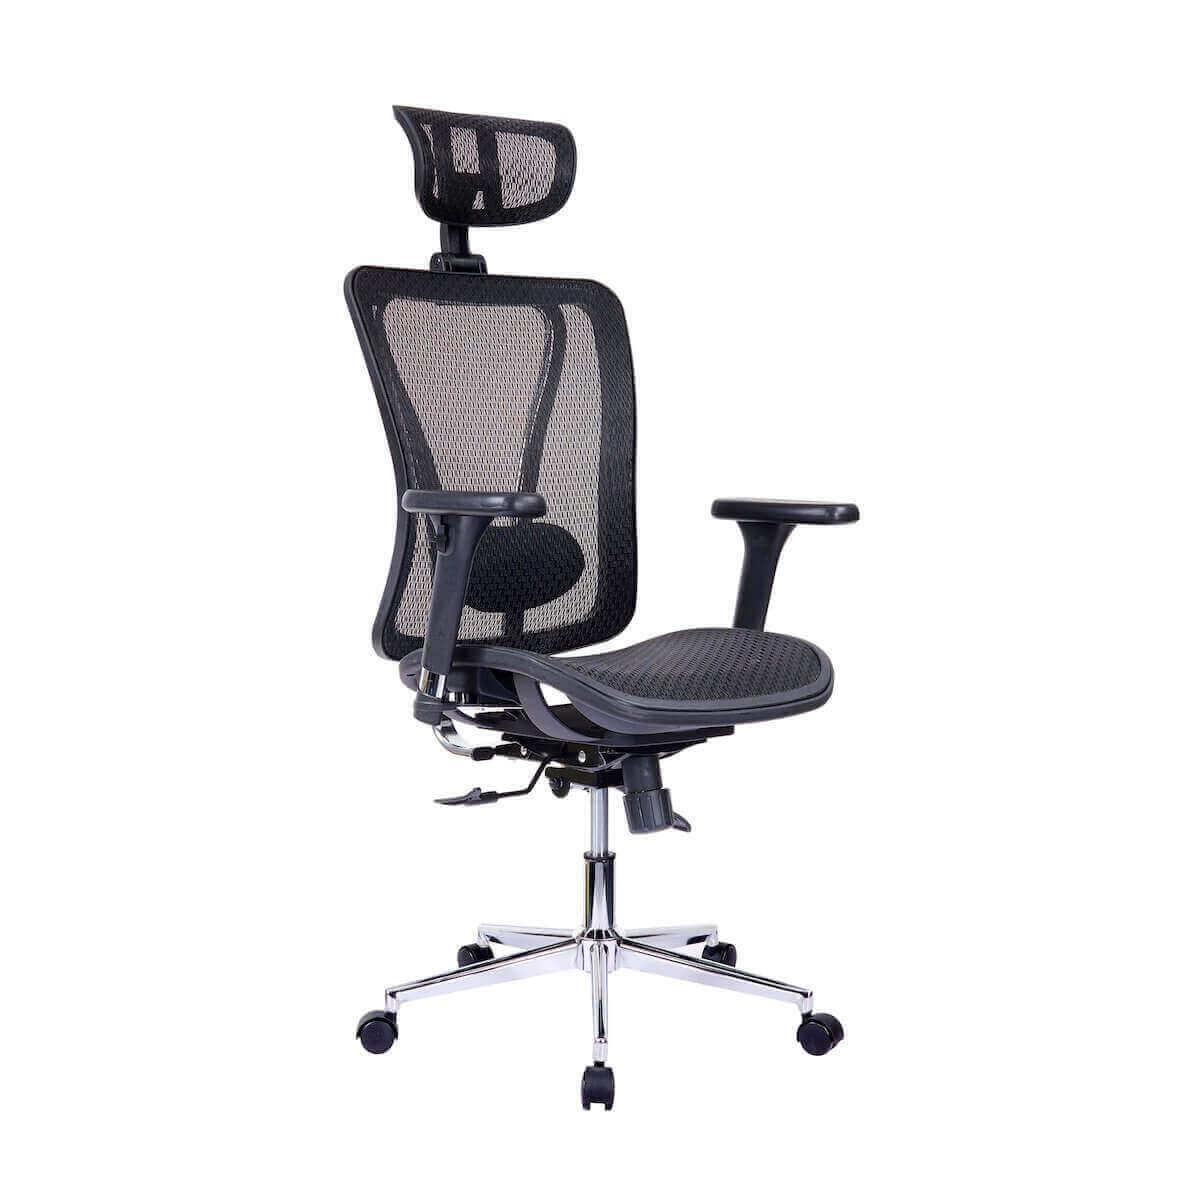 Techni Mobili Black High Back Executive Mesh Office Chair with Arms, Headrest, and Lumbar Support RTA-1009-BK Angle